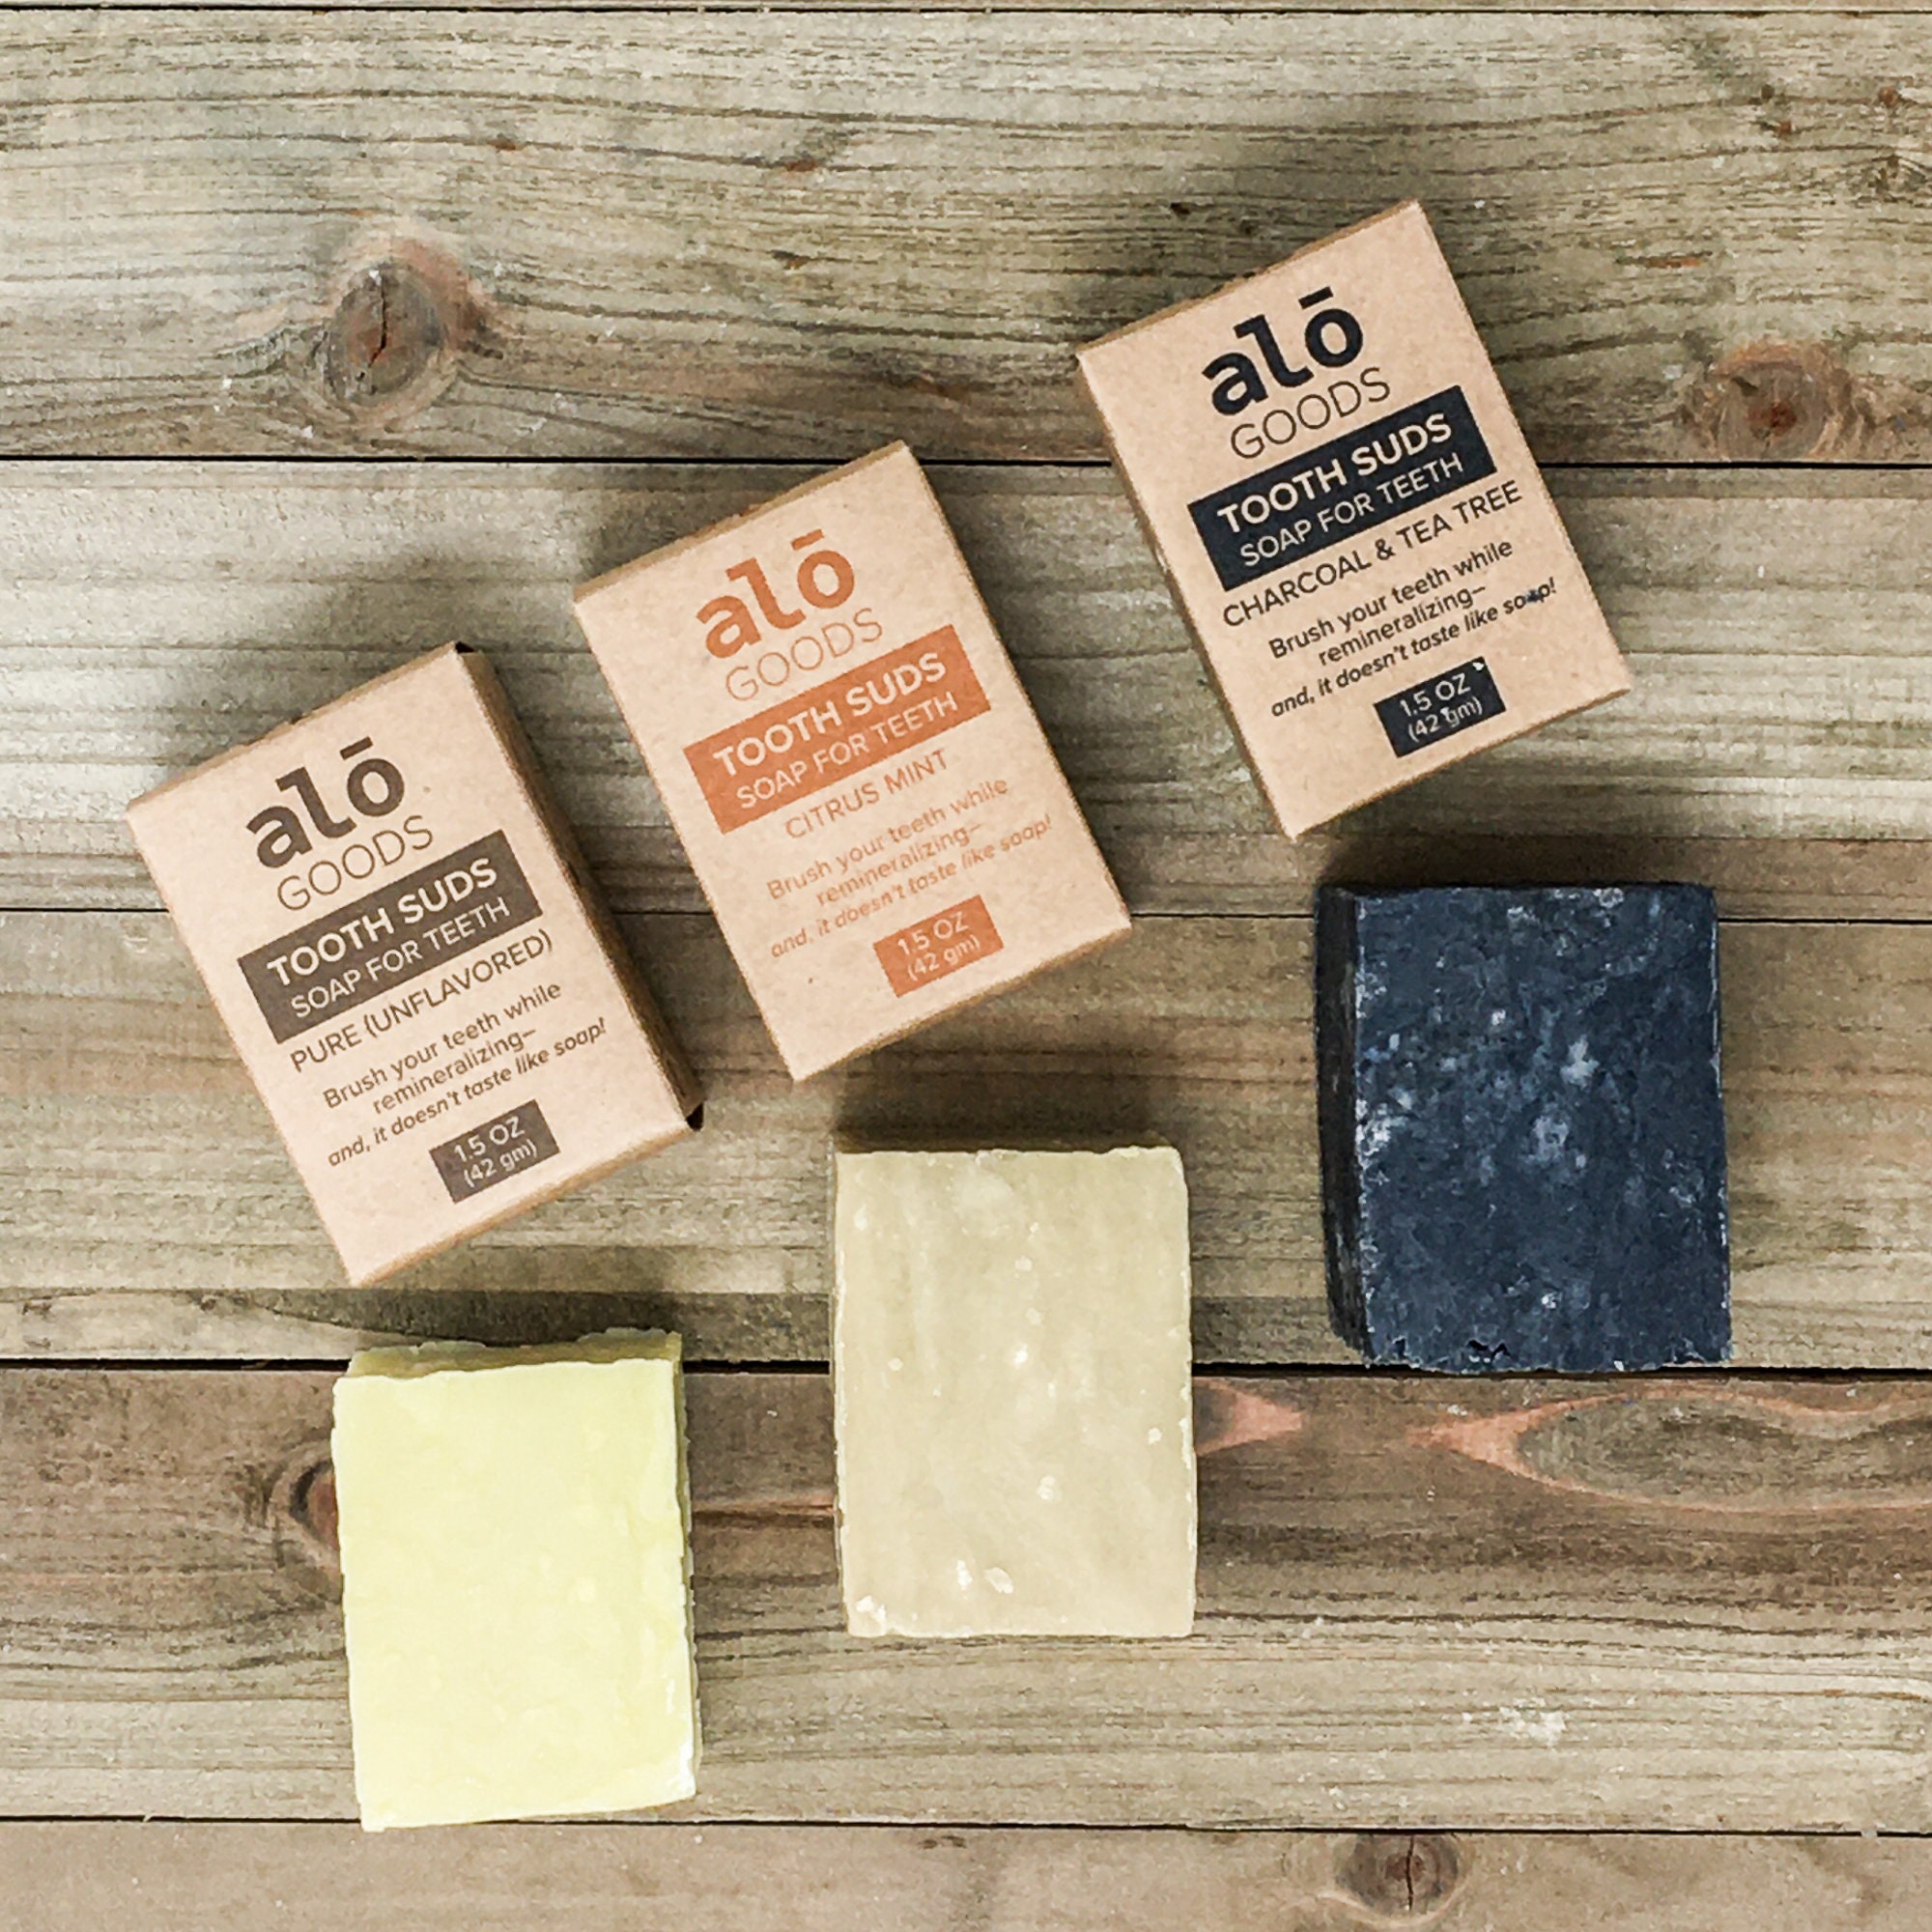 Brushing Your Teeth with Soap? Try Tooth Suds - Natural Toothpaste Soap